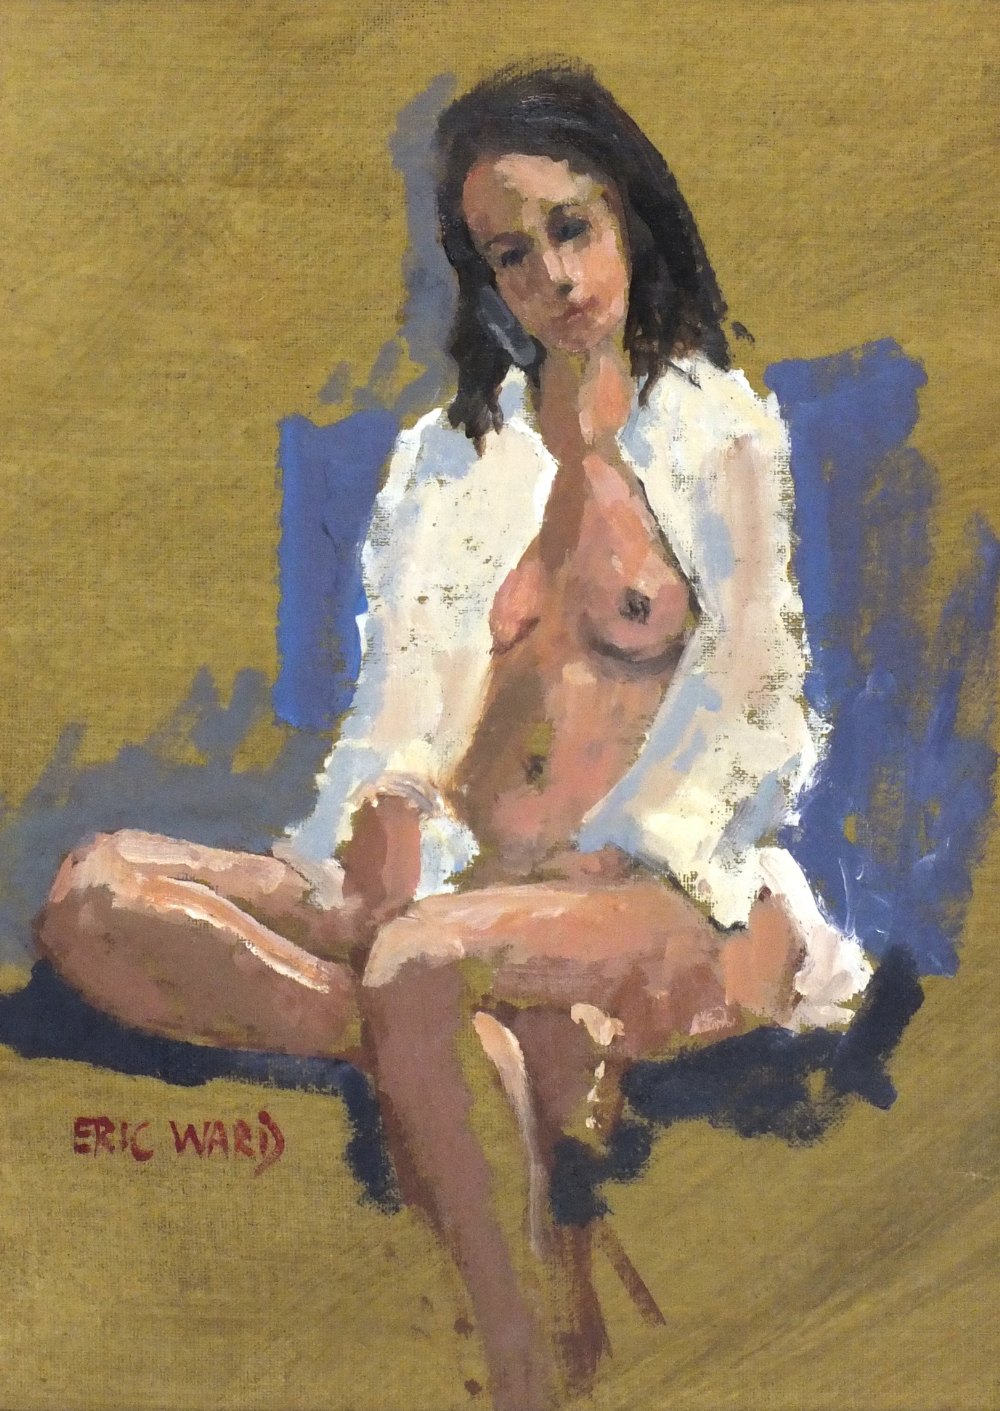 Eric WARD (b.1945) Oil on canvas board `Life model in a white shirt` Inscribed on label to verso